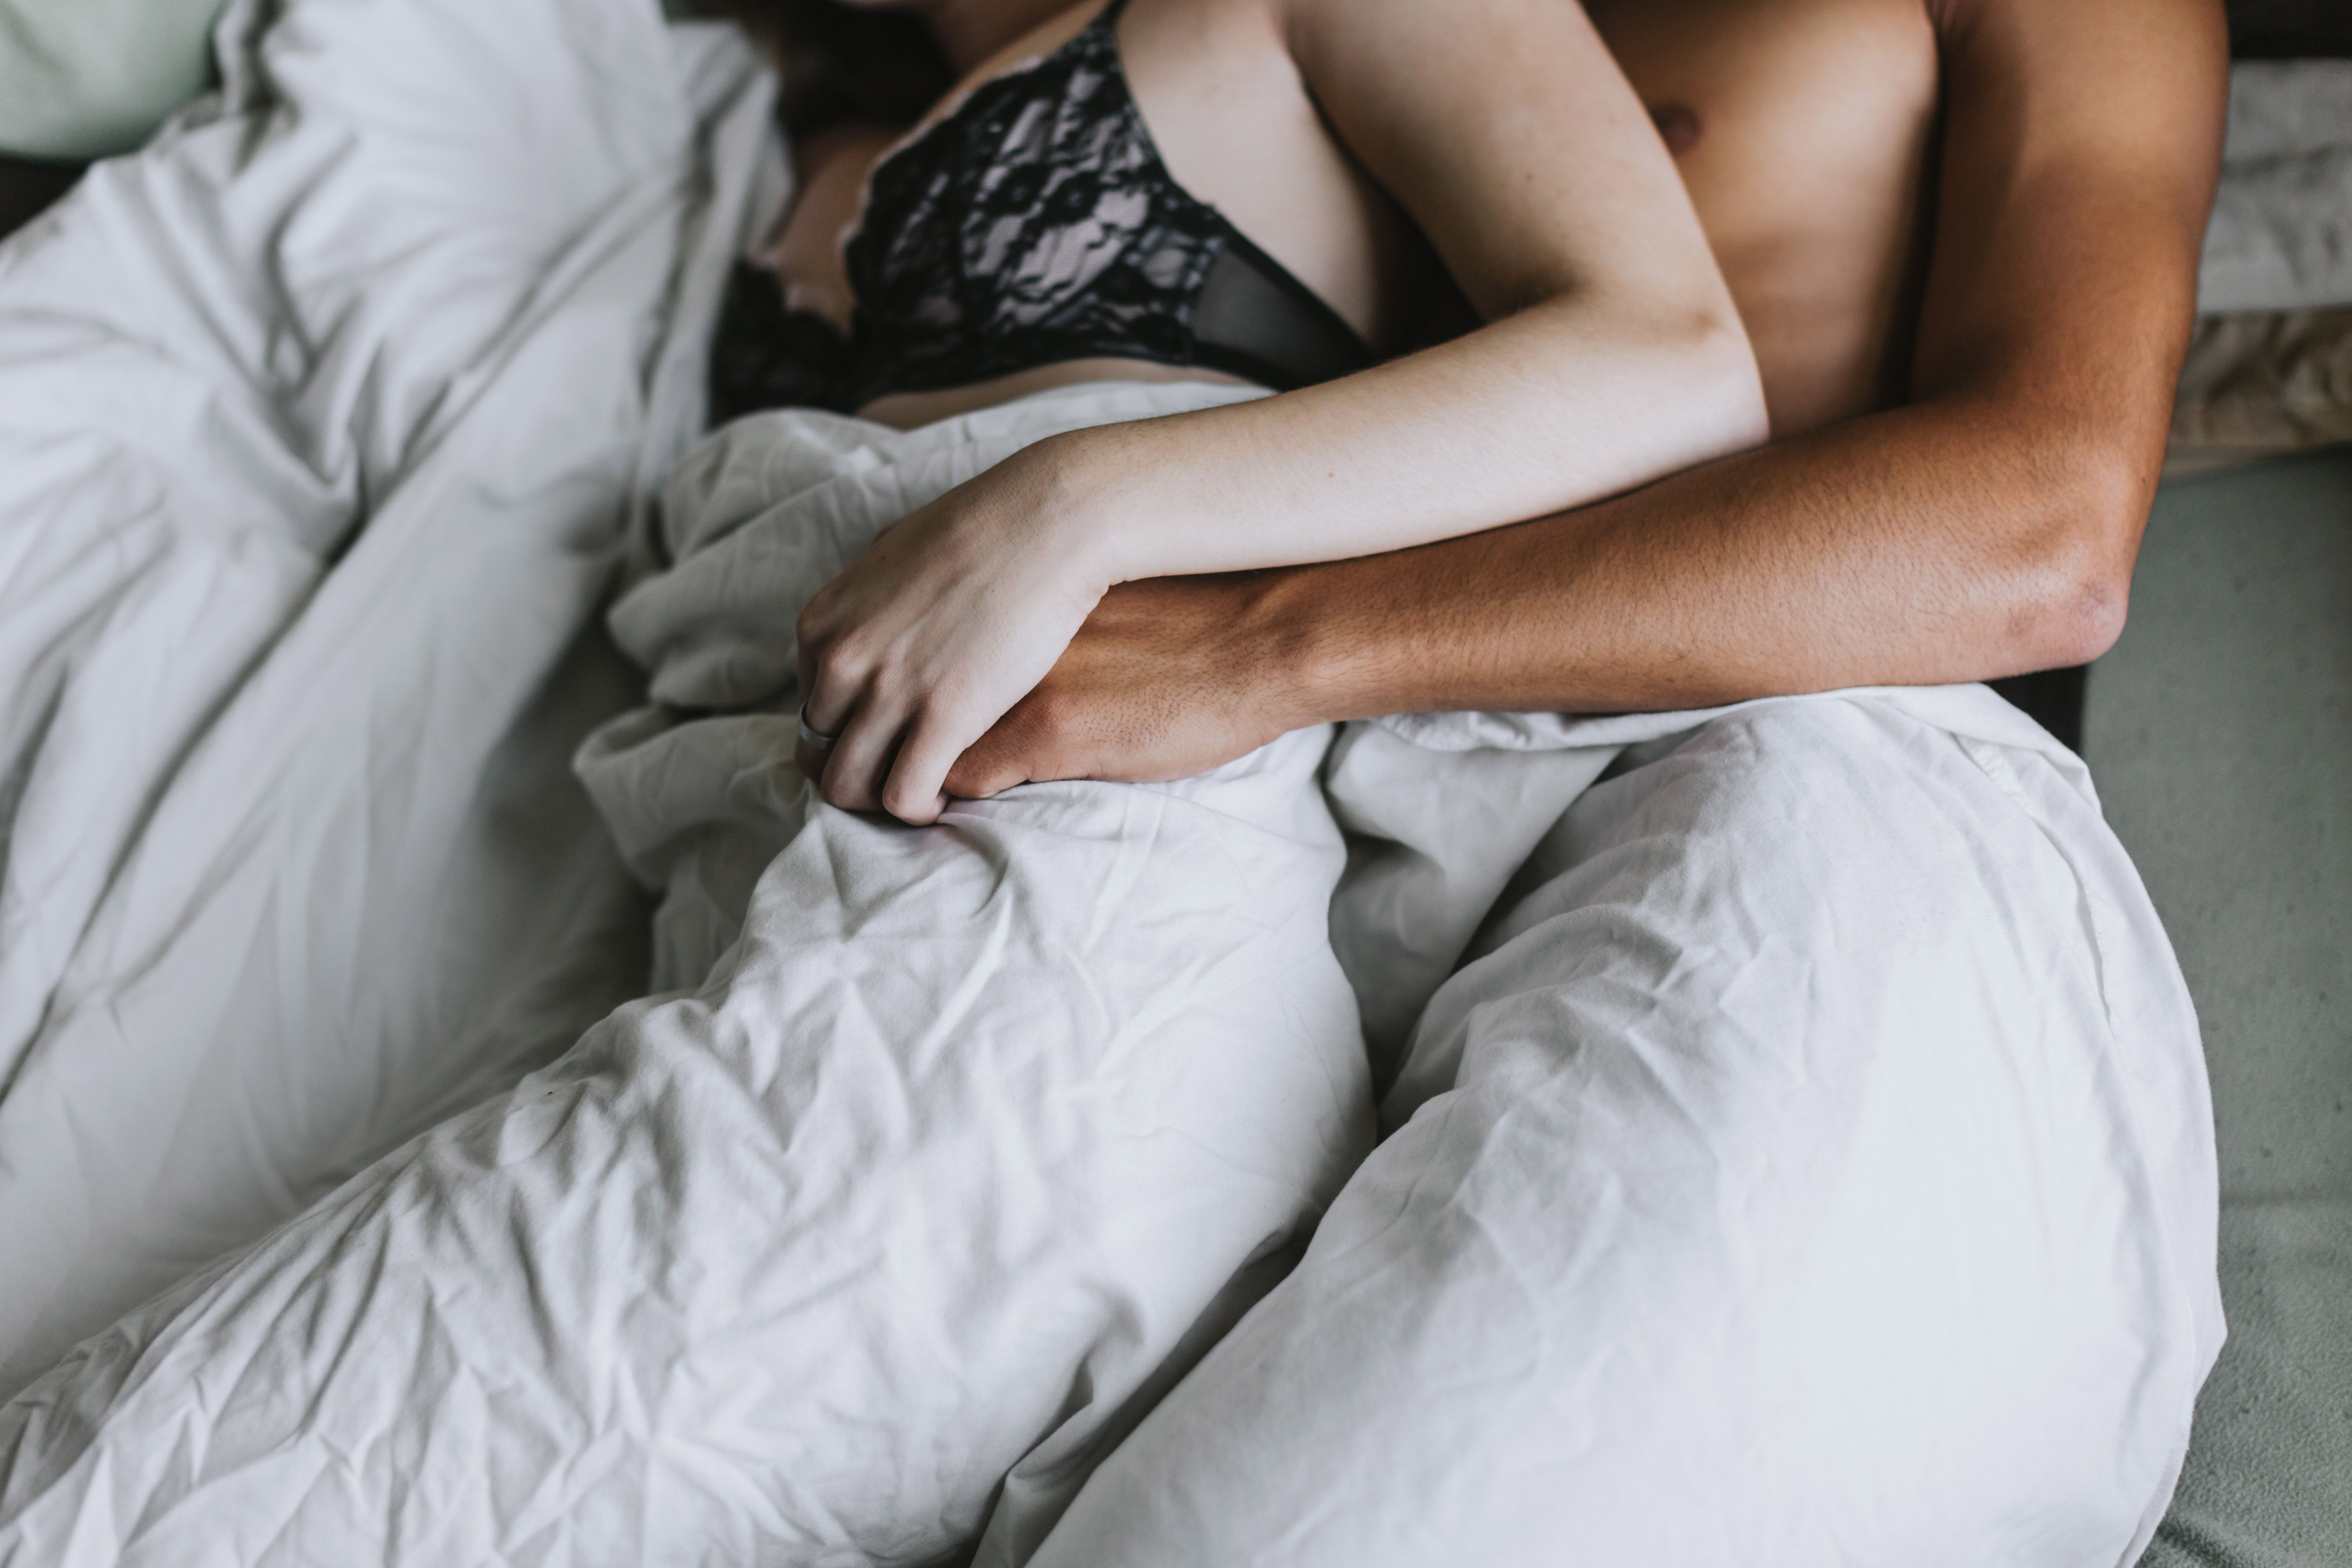 Leaving Right After Hooking Upâ€”Why It's OK, How to to Do it